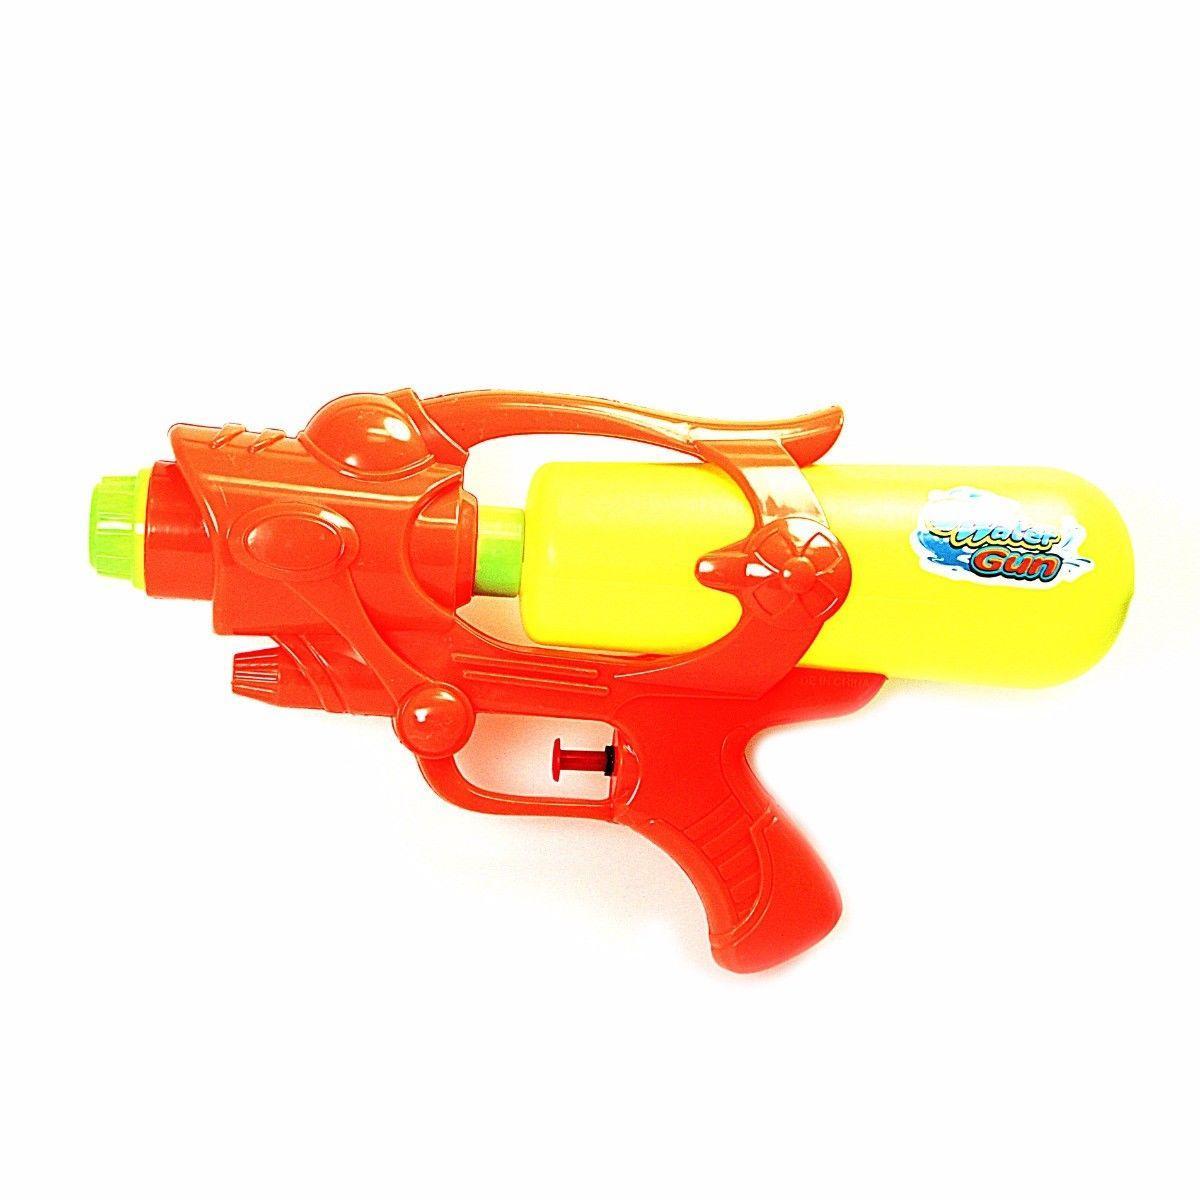 Children's Splash Fun Water Gun Available In Red And Green Outdoors Toys 4565 (Parcel Rate)